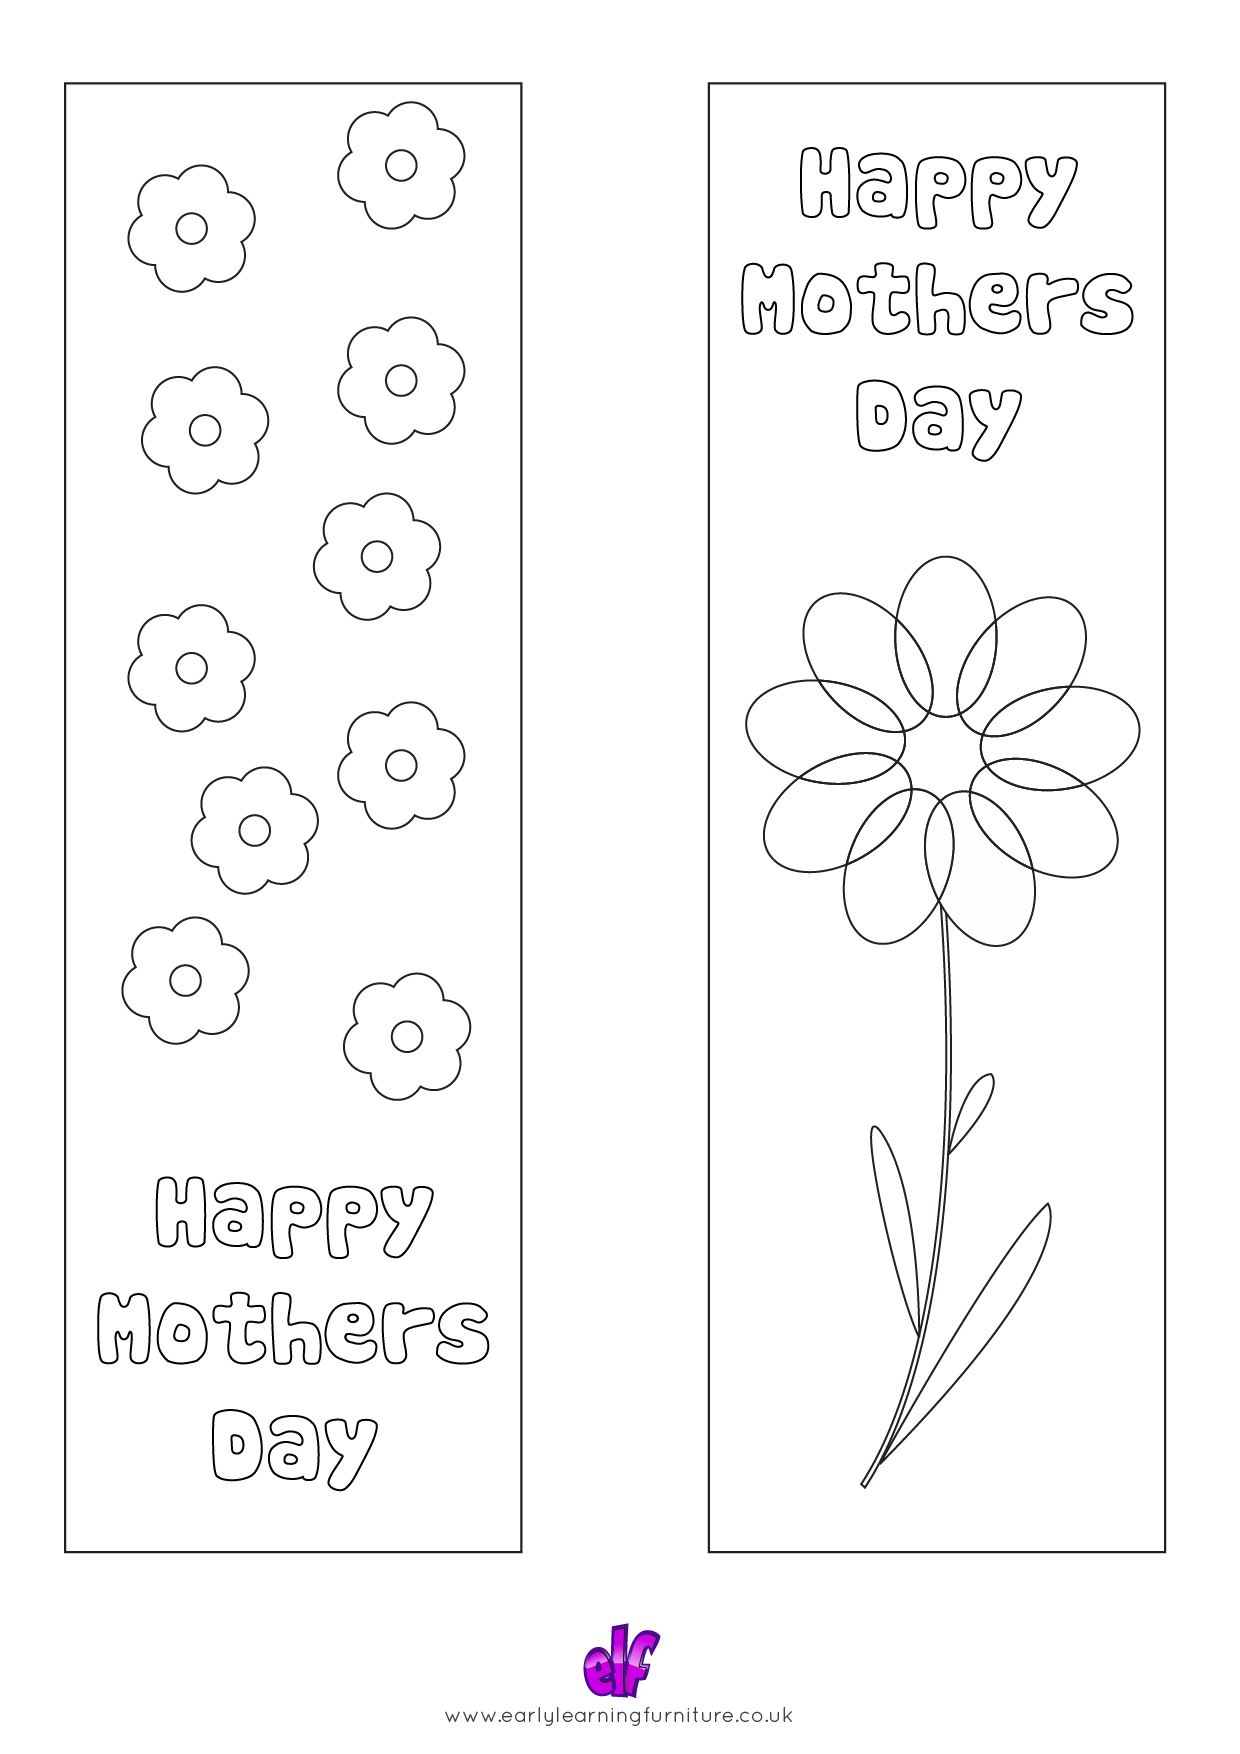 mothers-day-free-printable-teaching-resources-early-learning-furniture